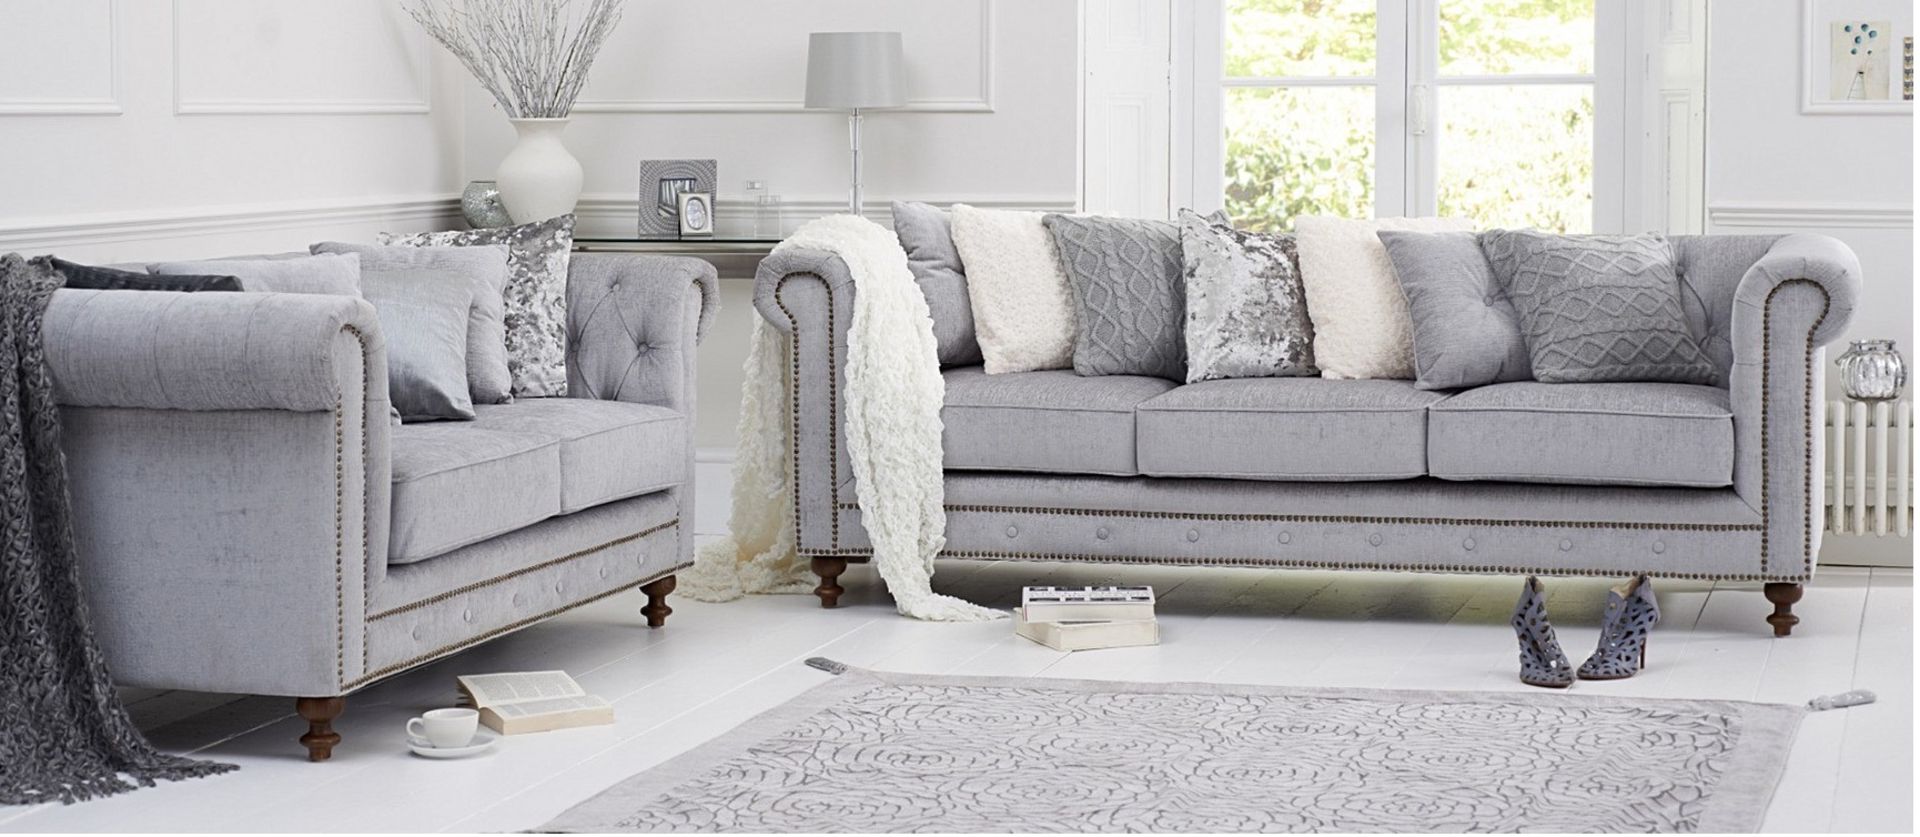 Milano Chesterfield Grey Plush Fabric Two Seater Sofa Exudes Modern Luxury With Raditional Buttoning - Image 2 of 2